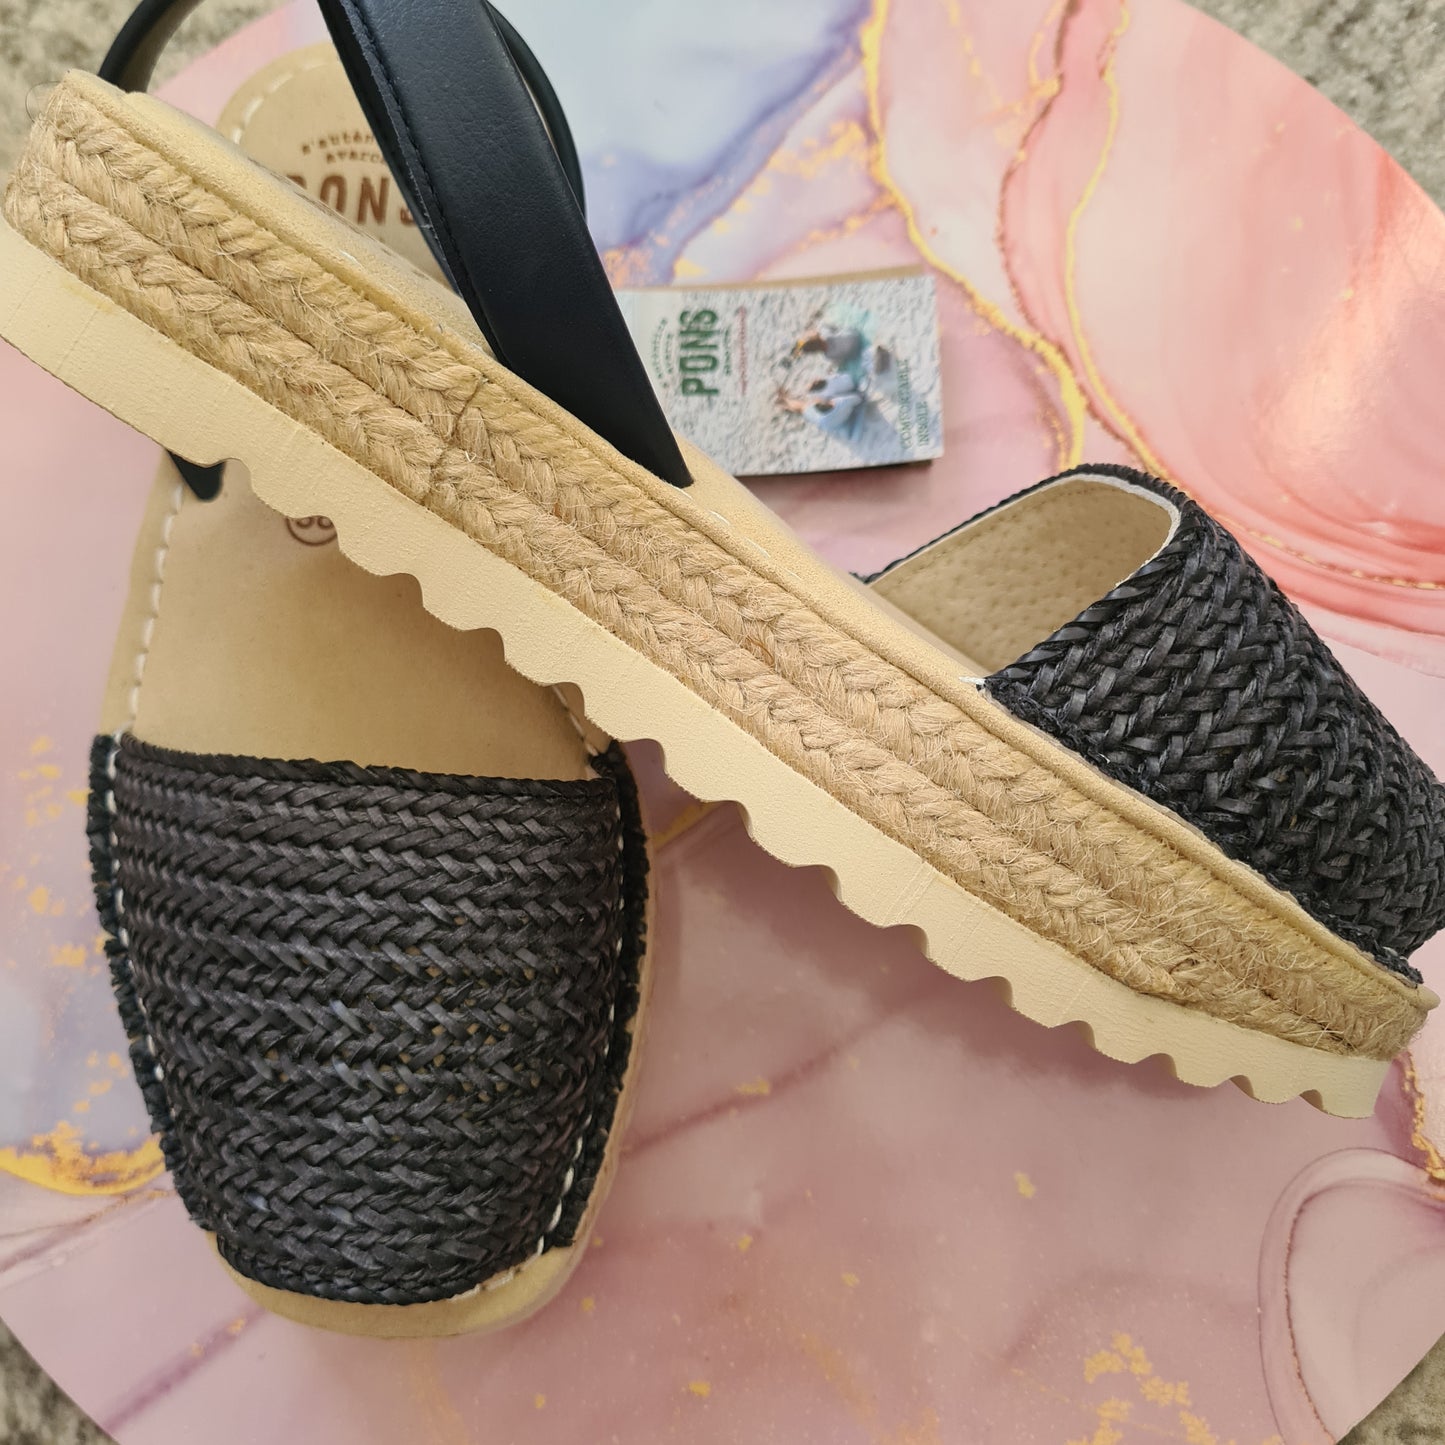 Charcoal Espadrille Pons